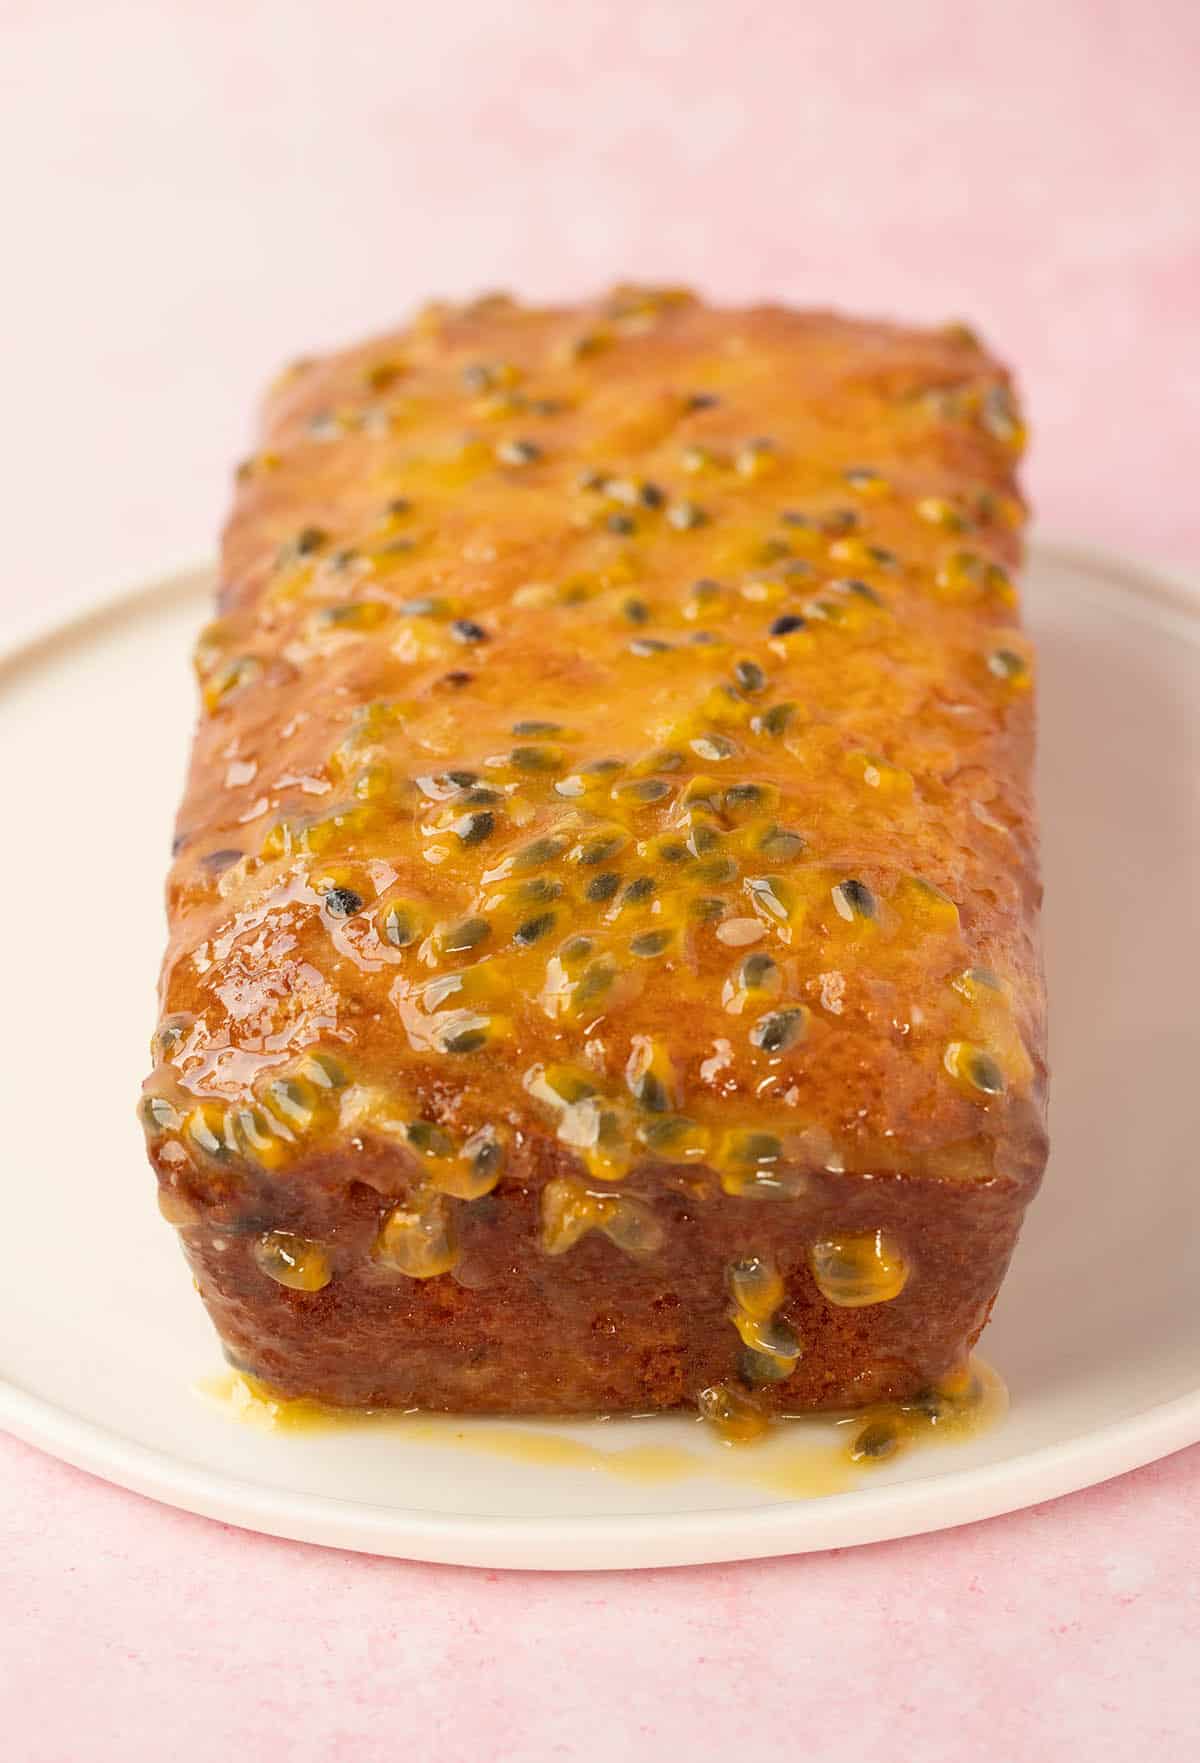 A Passionfruit Loaf Cake on a pink background.